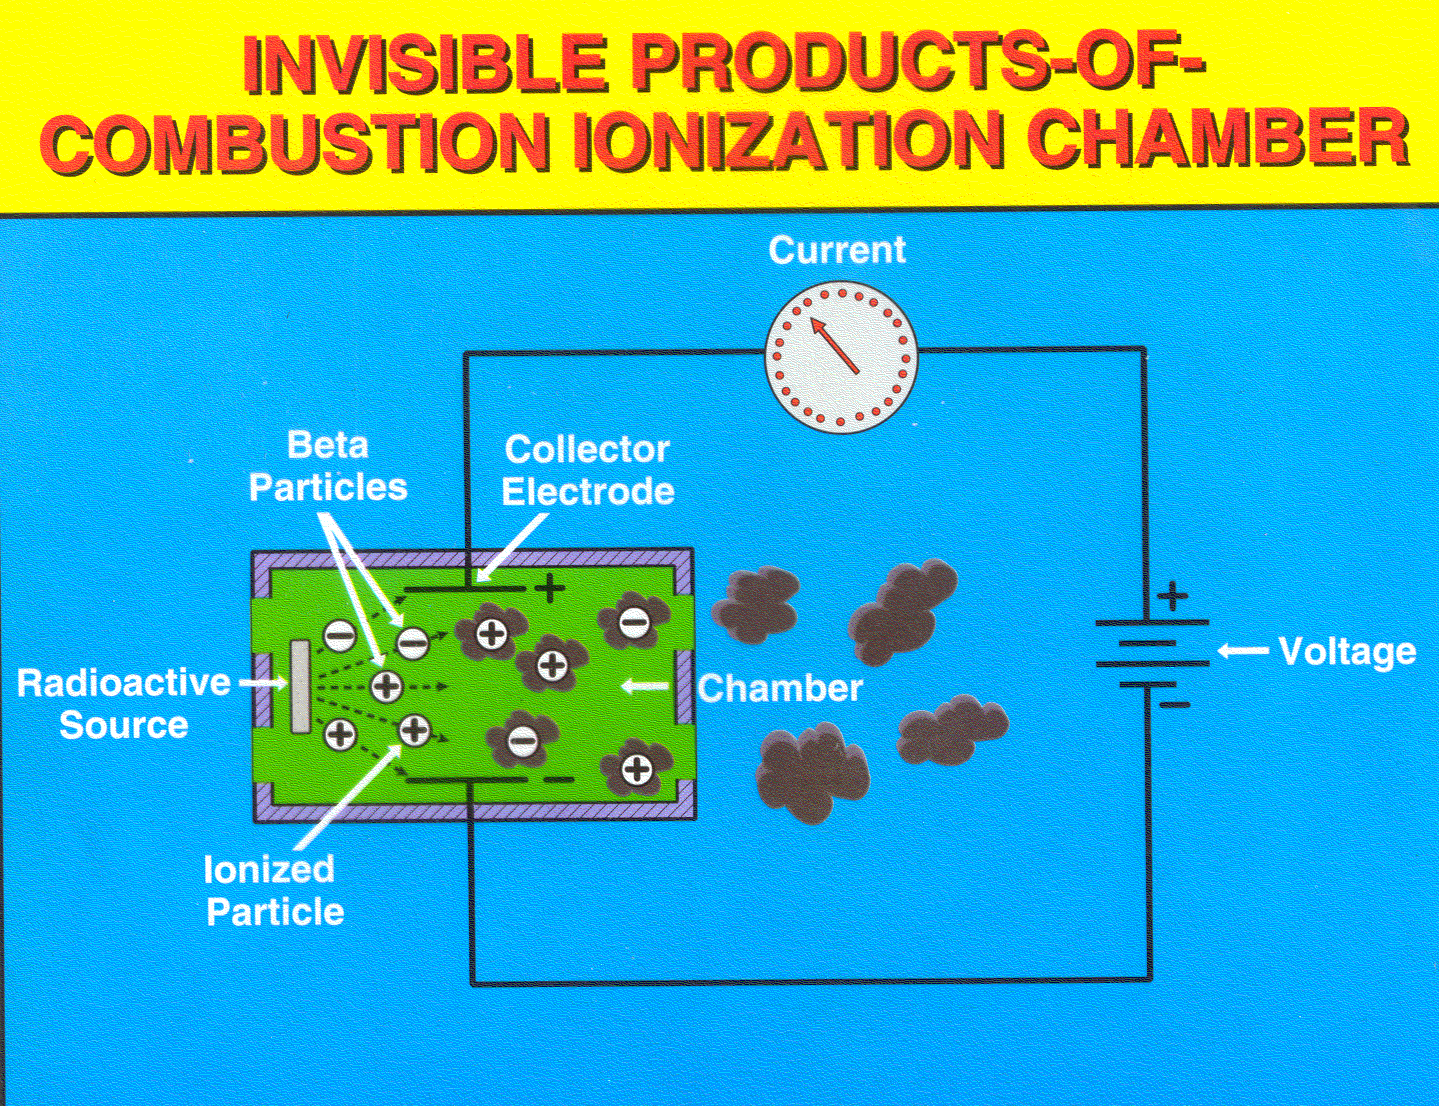 Invisible Products-of-Compustion Ionization chamber